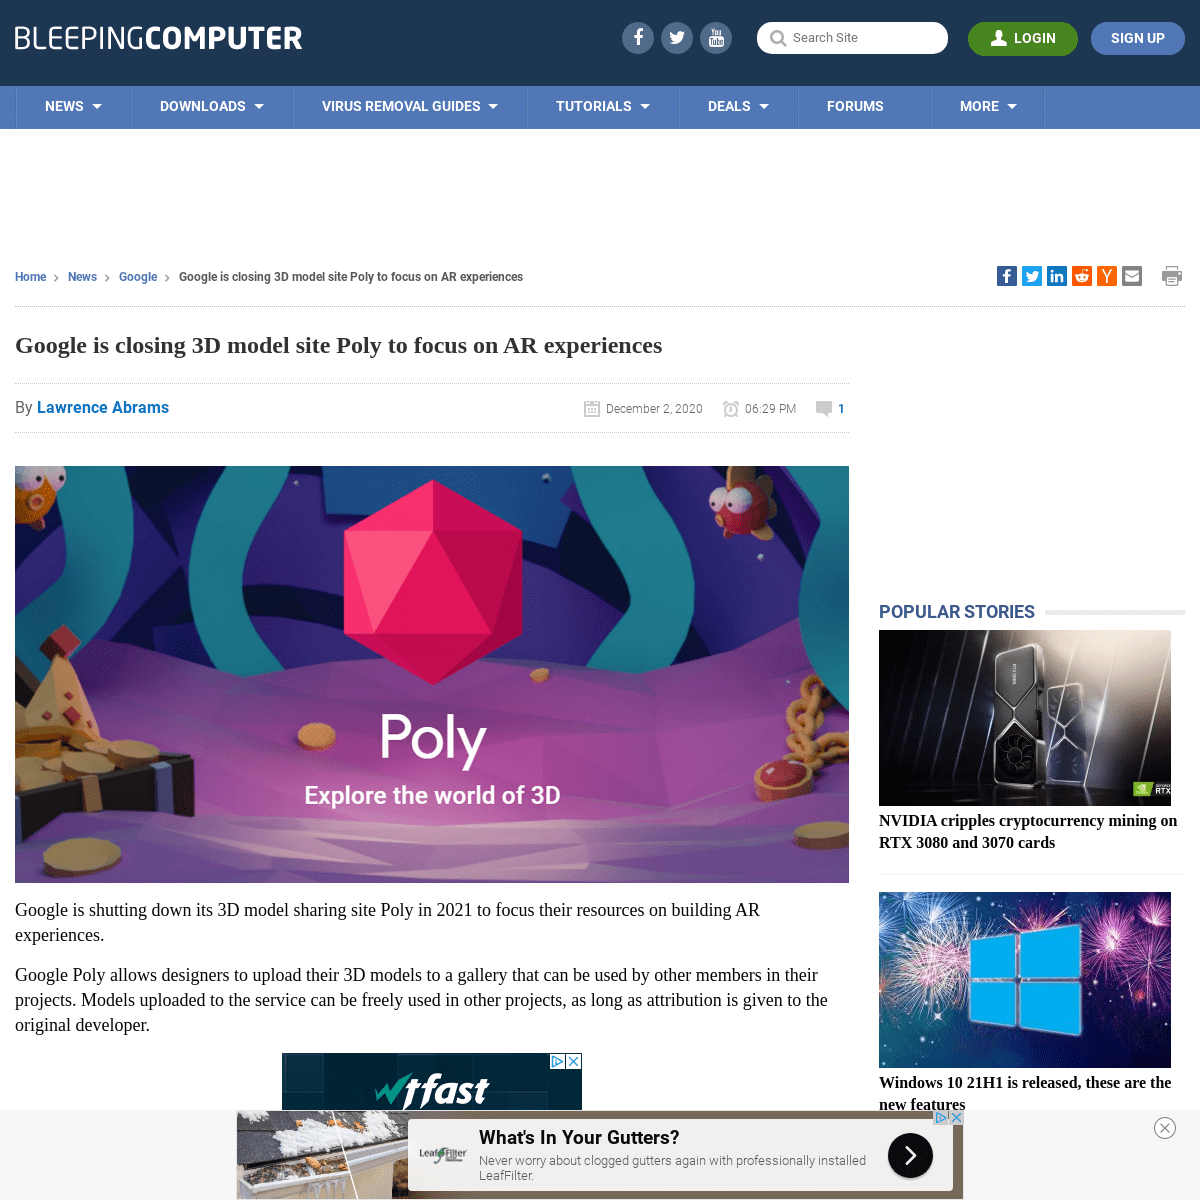 A complete backup of https://www.bleepingcomputer.com/news/google/google-is-closing-3d-model-site-poly-to-focus-on-ar-experience